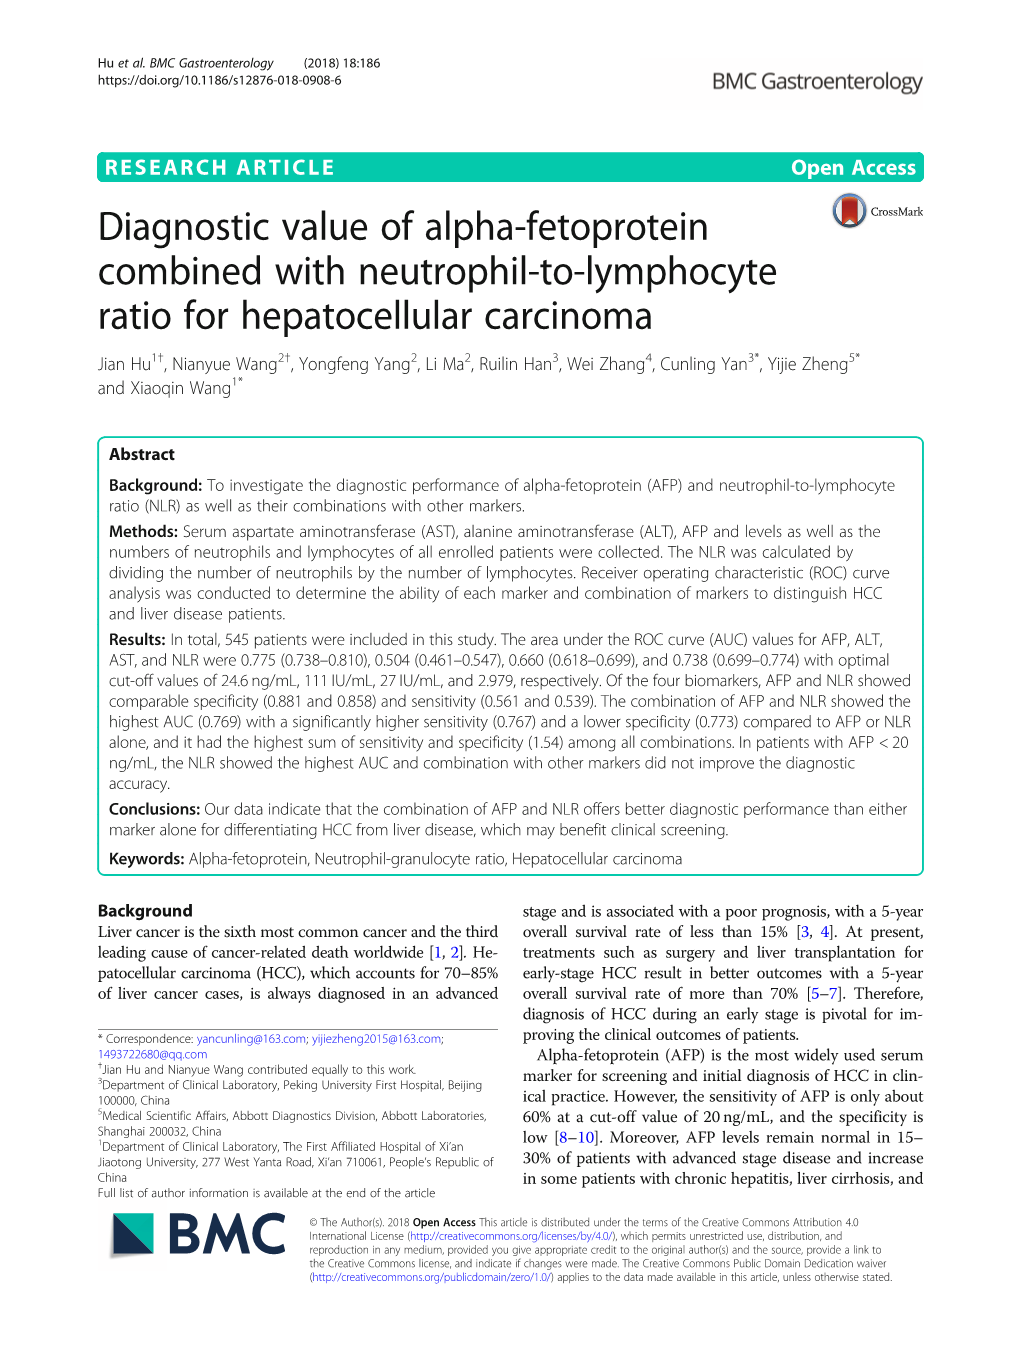 Diagnostic Value of Alpha-Fetoprotein Combined with Neutrophil-To